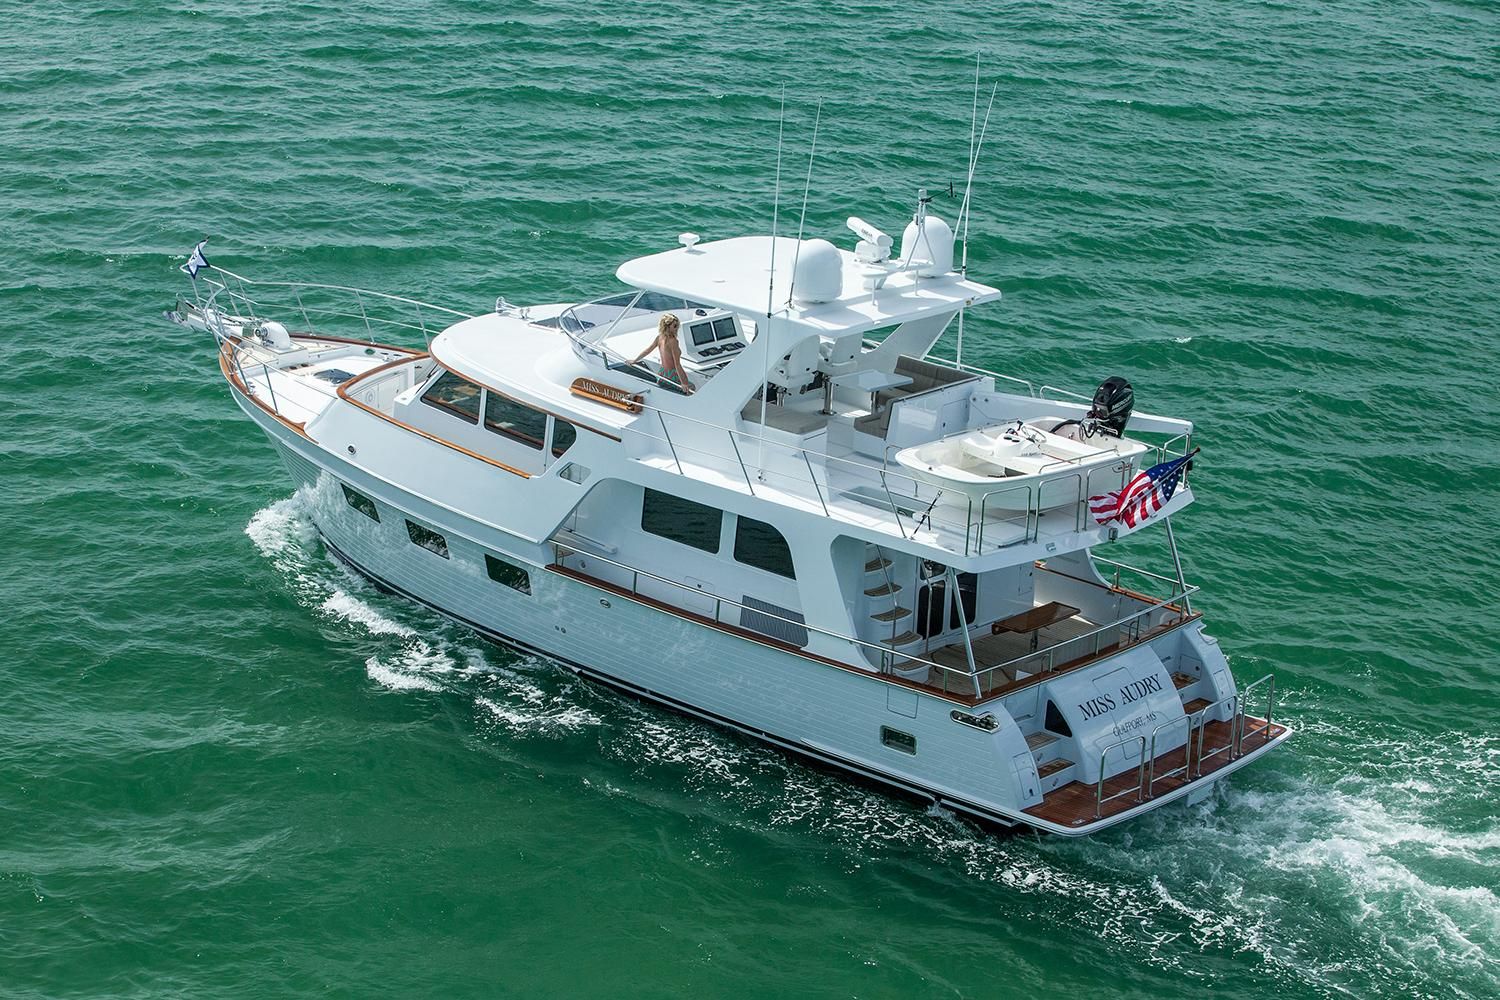 marlow motor yacht for sale